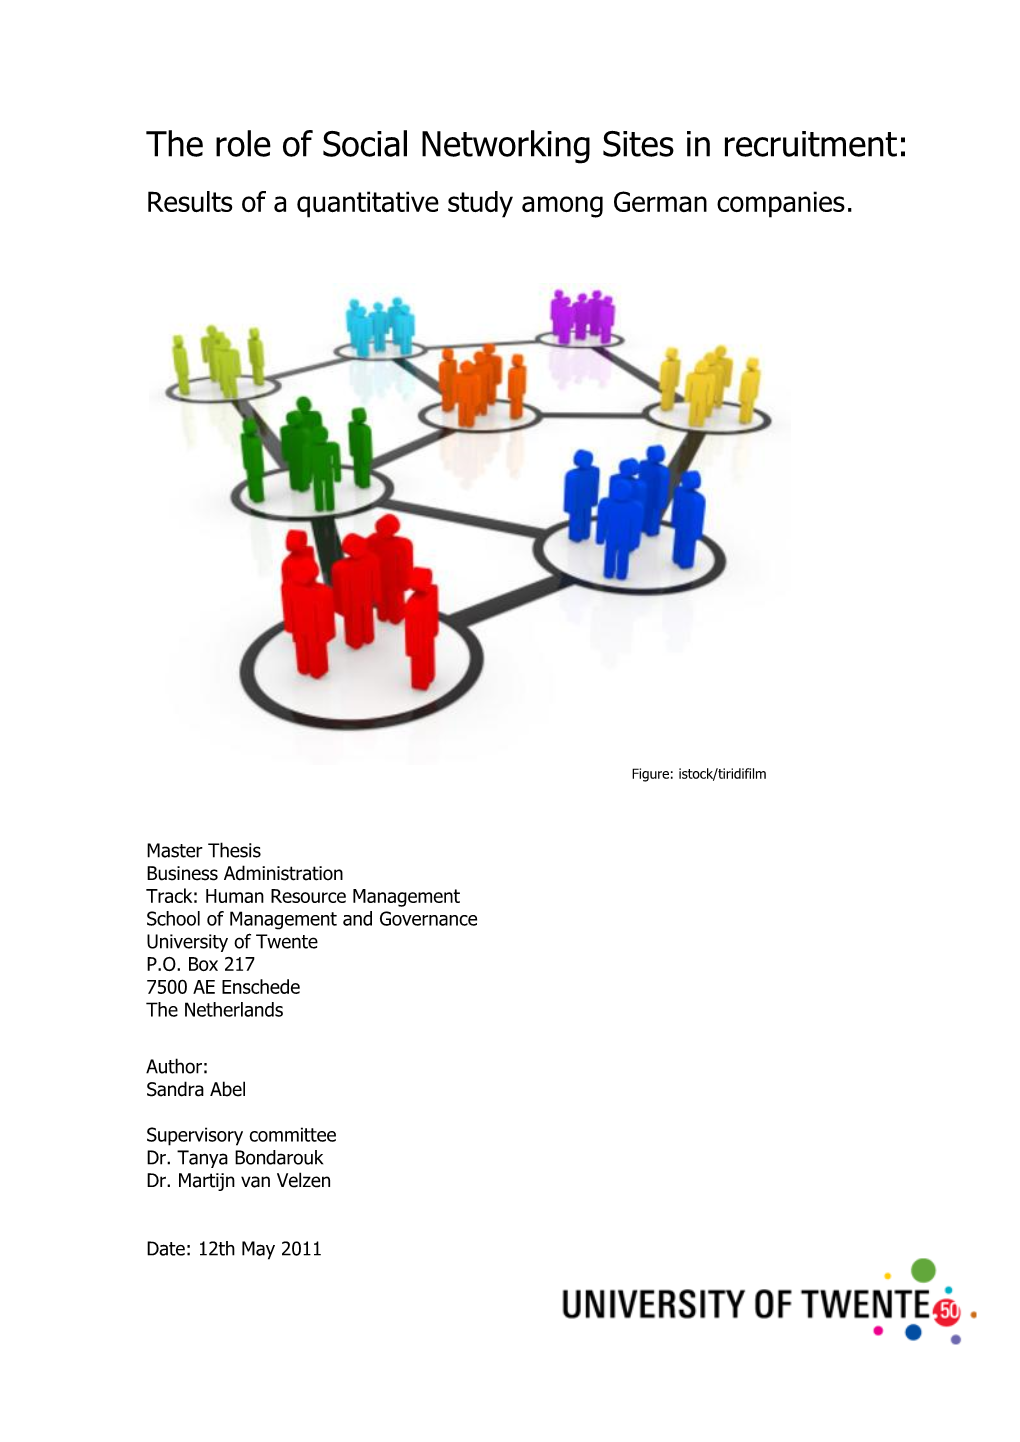 The Role of Social Networking Sites in Recruitment: Results of a Quantitative Study Among German Companies